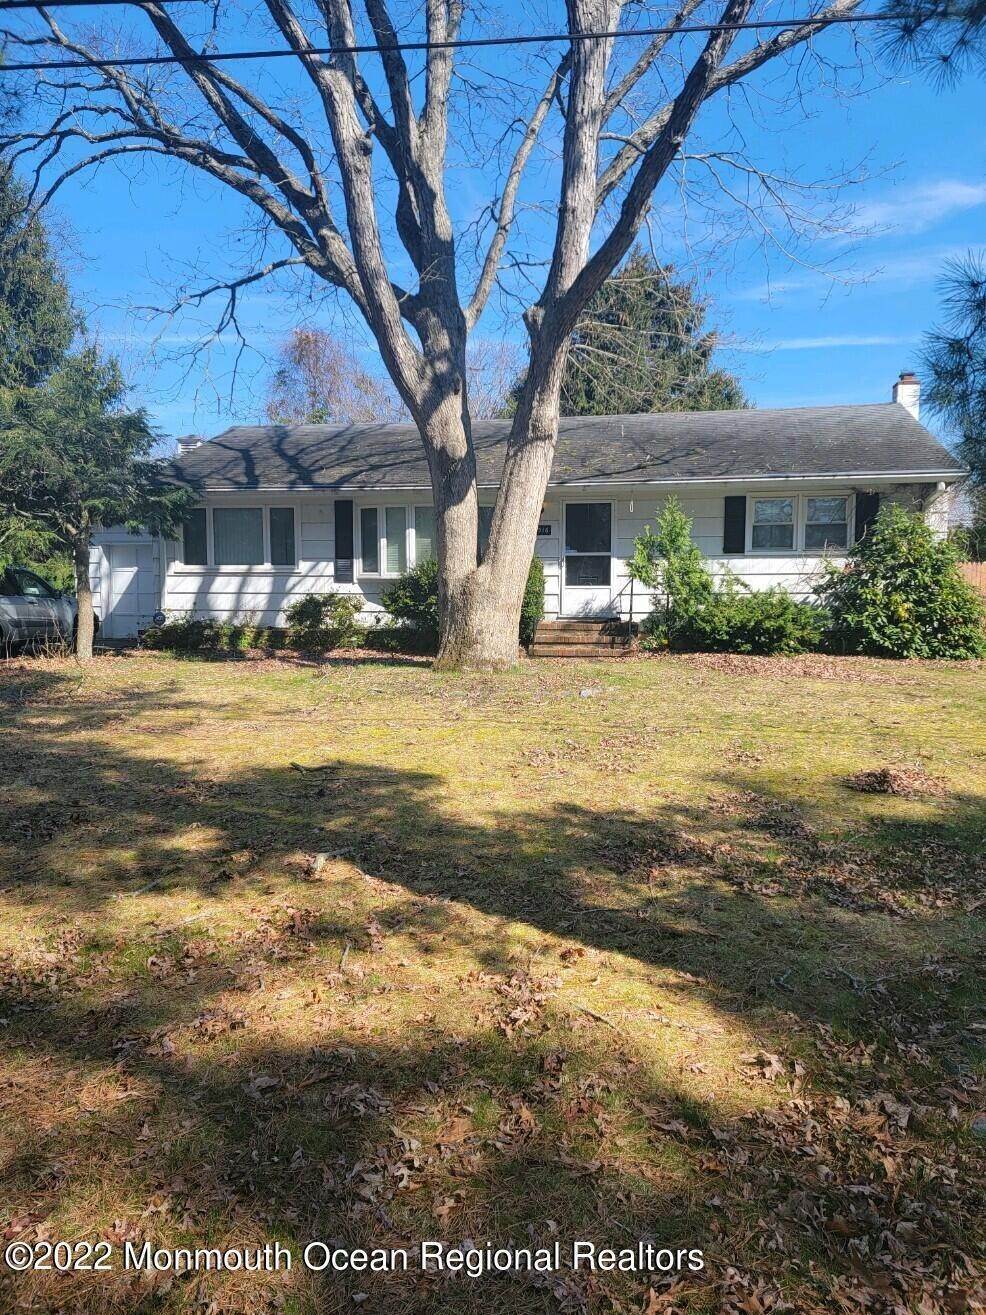 Property for Sale at 516 Hunters Road Brick, New Jersey 08724 United States